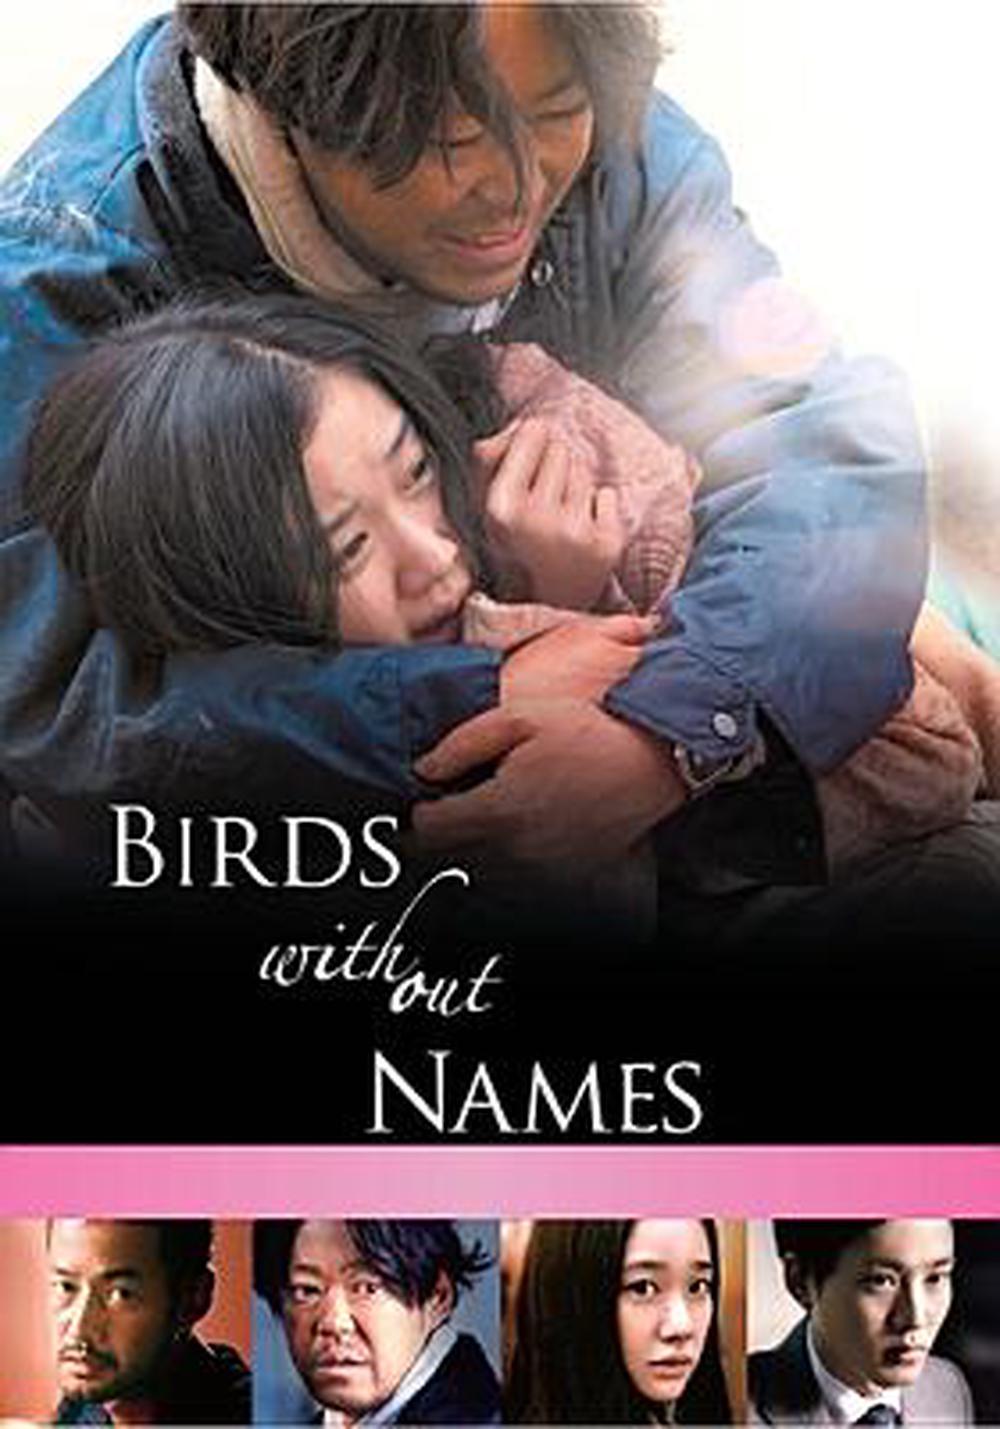 Birds Without Names - DVD Region 1 Free Shipping! | eBay